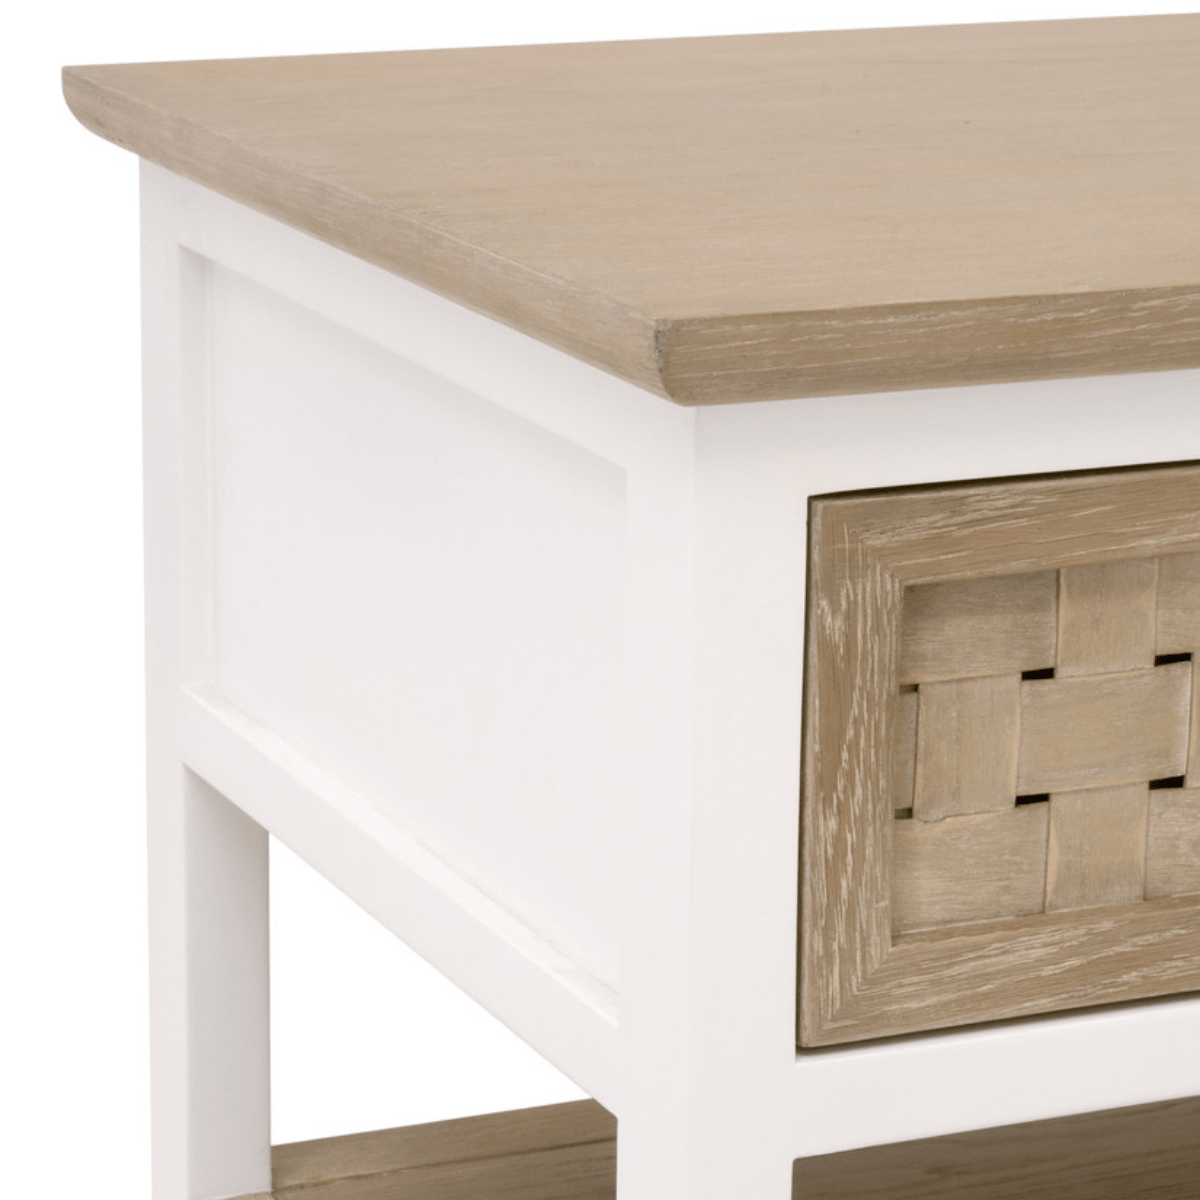 Weave 1-Drawer Side Table 8081-1.SGRY-OAK/WPO